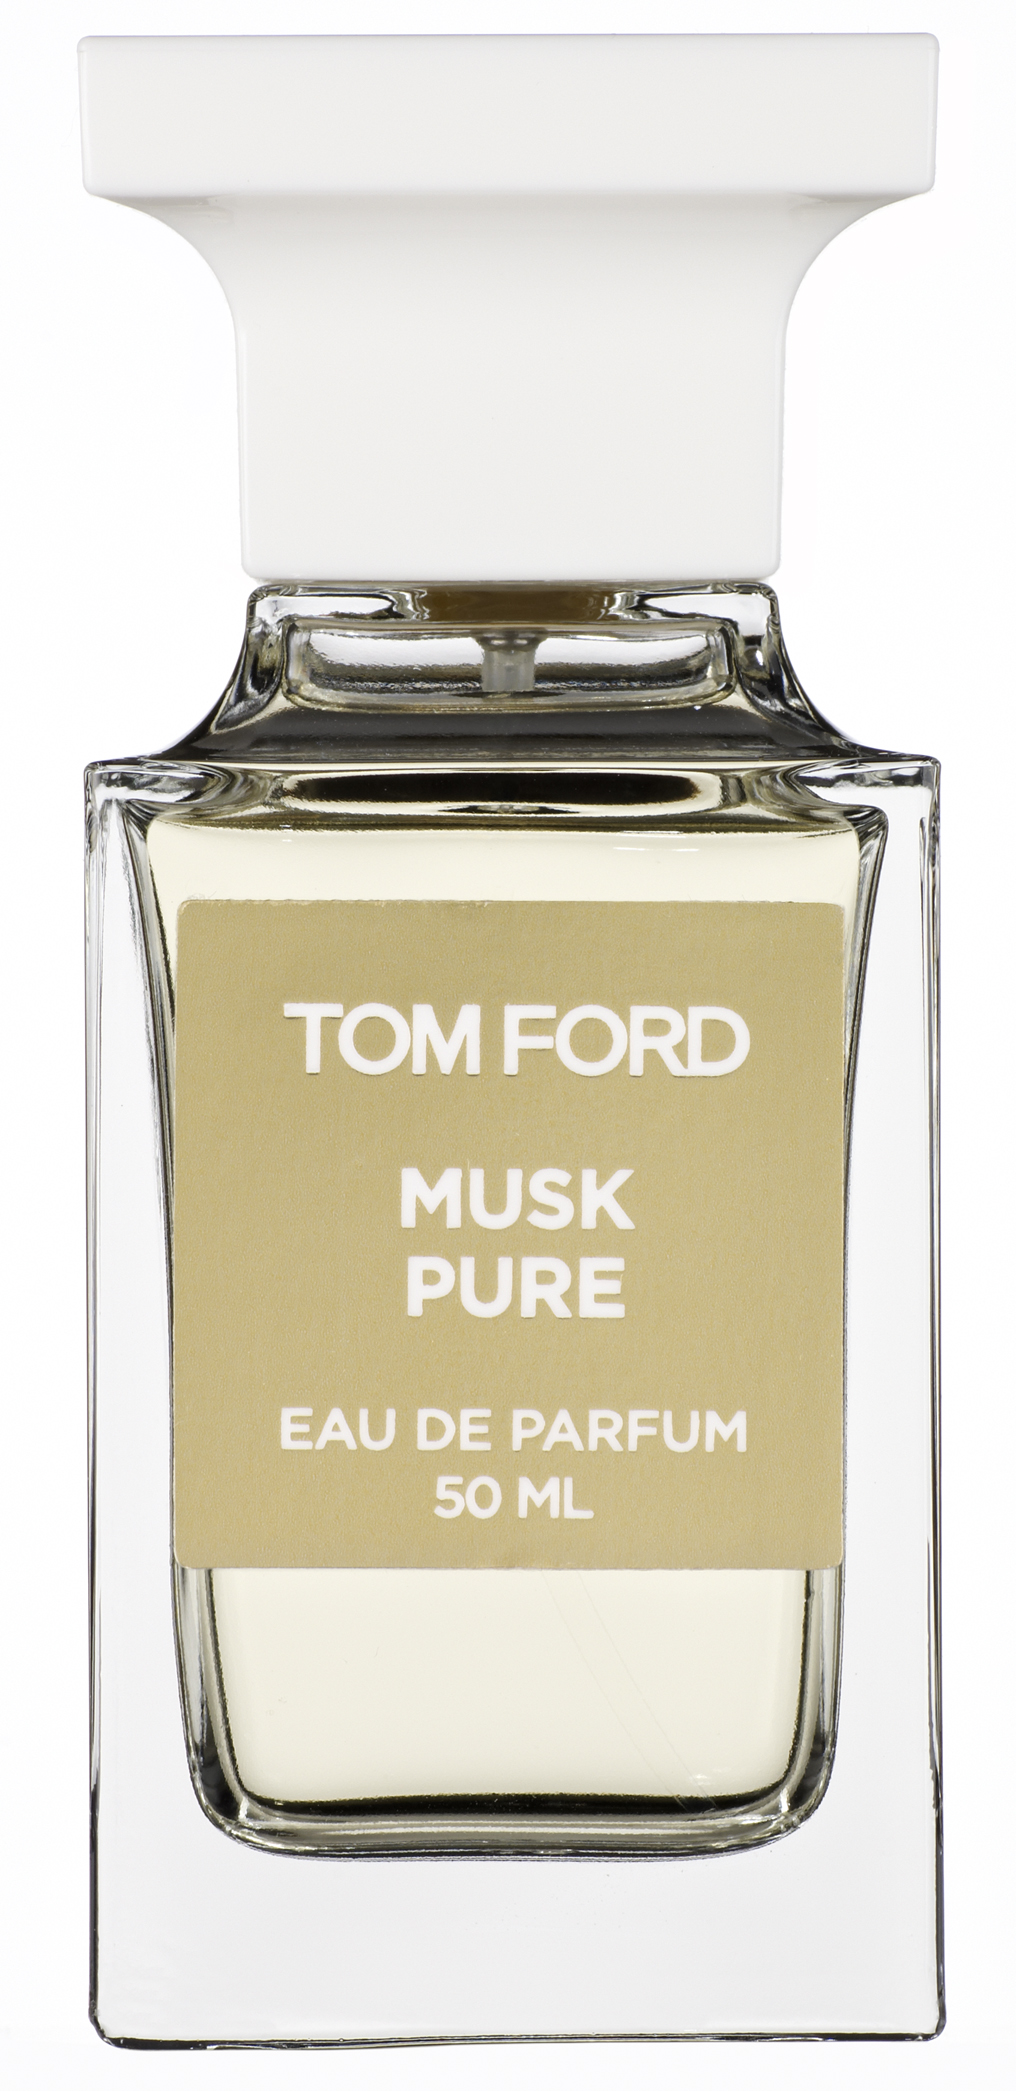 Tom ford musk pure notes #6